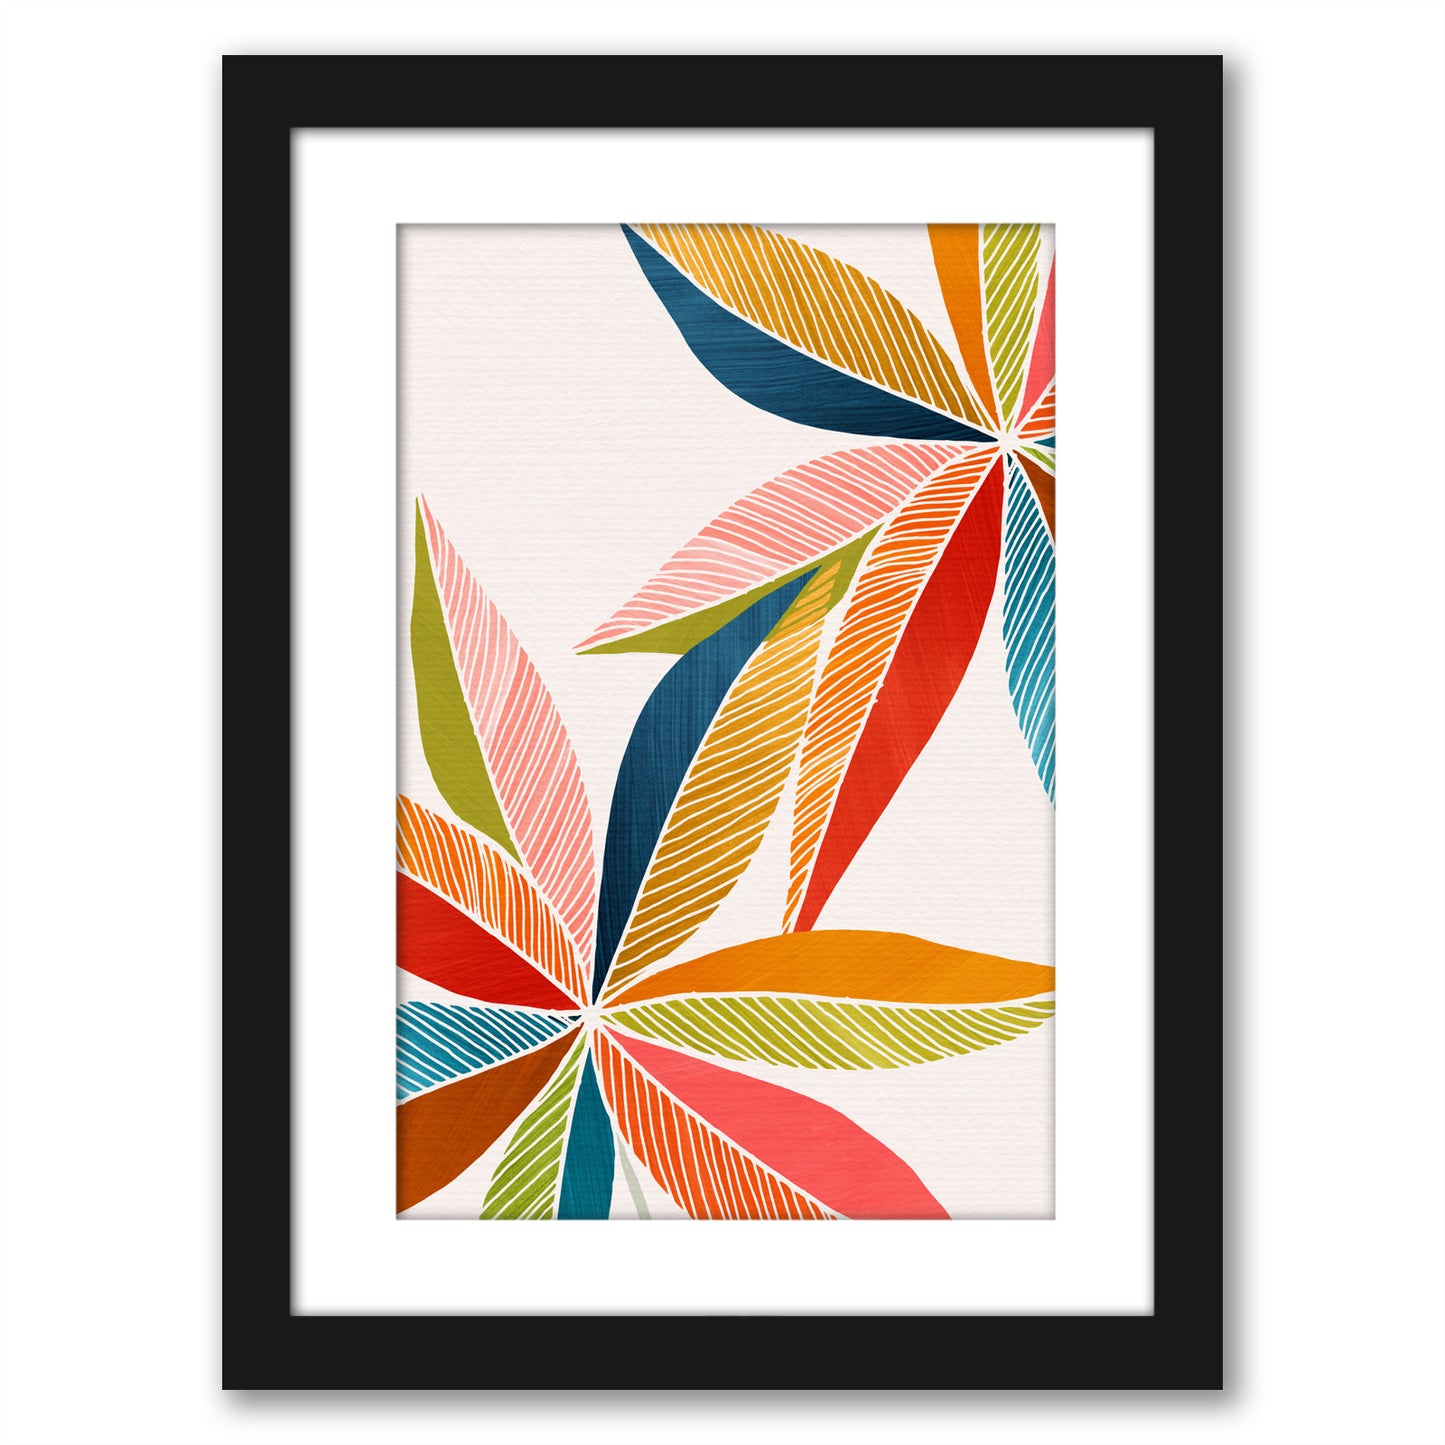 Multicolorful By Modern Tropical - Framed Print - Americanflat